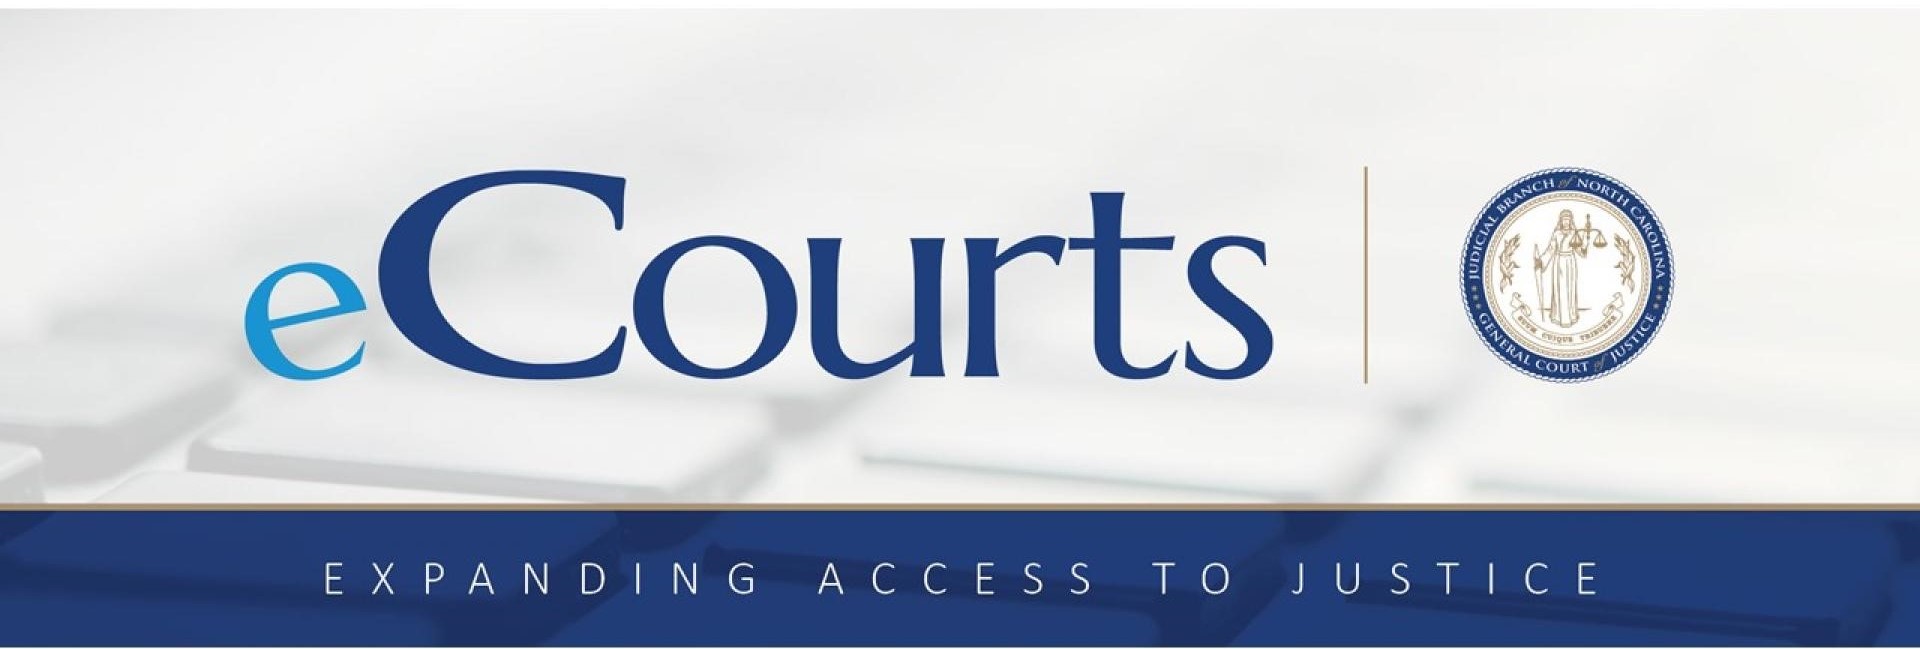 eCourts Expanding Access to Justice logo